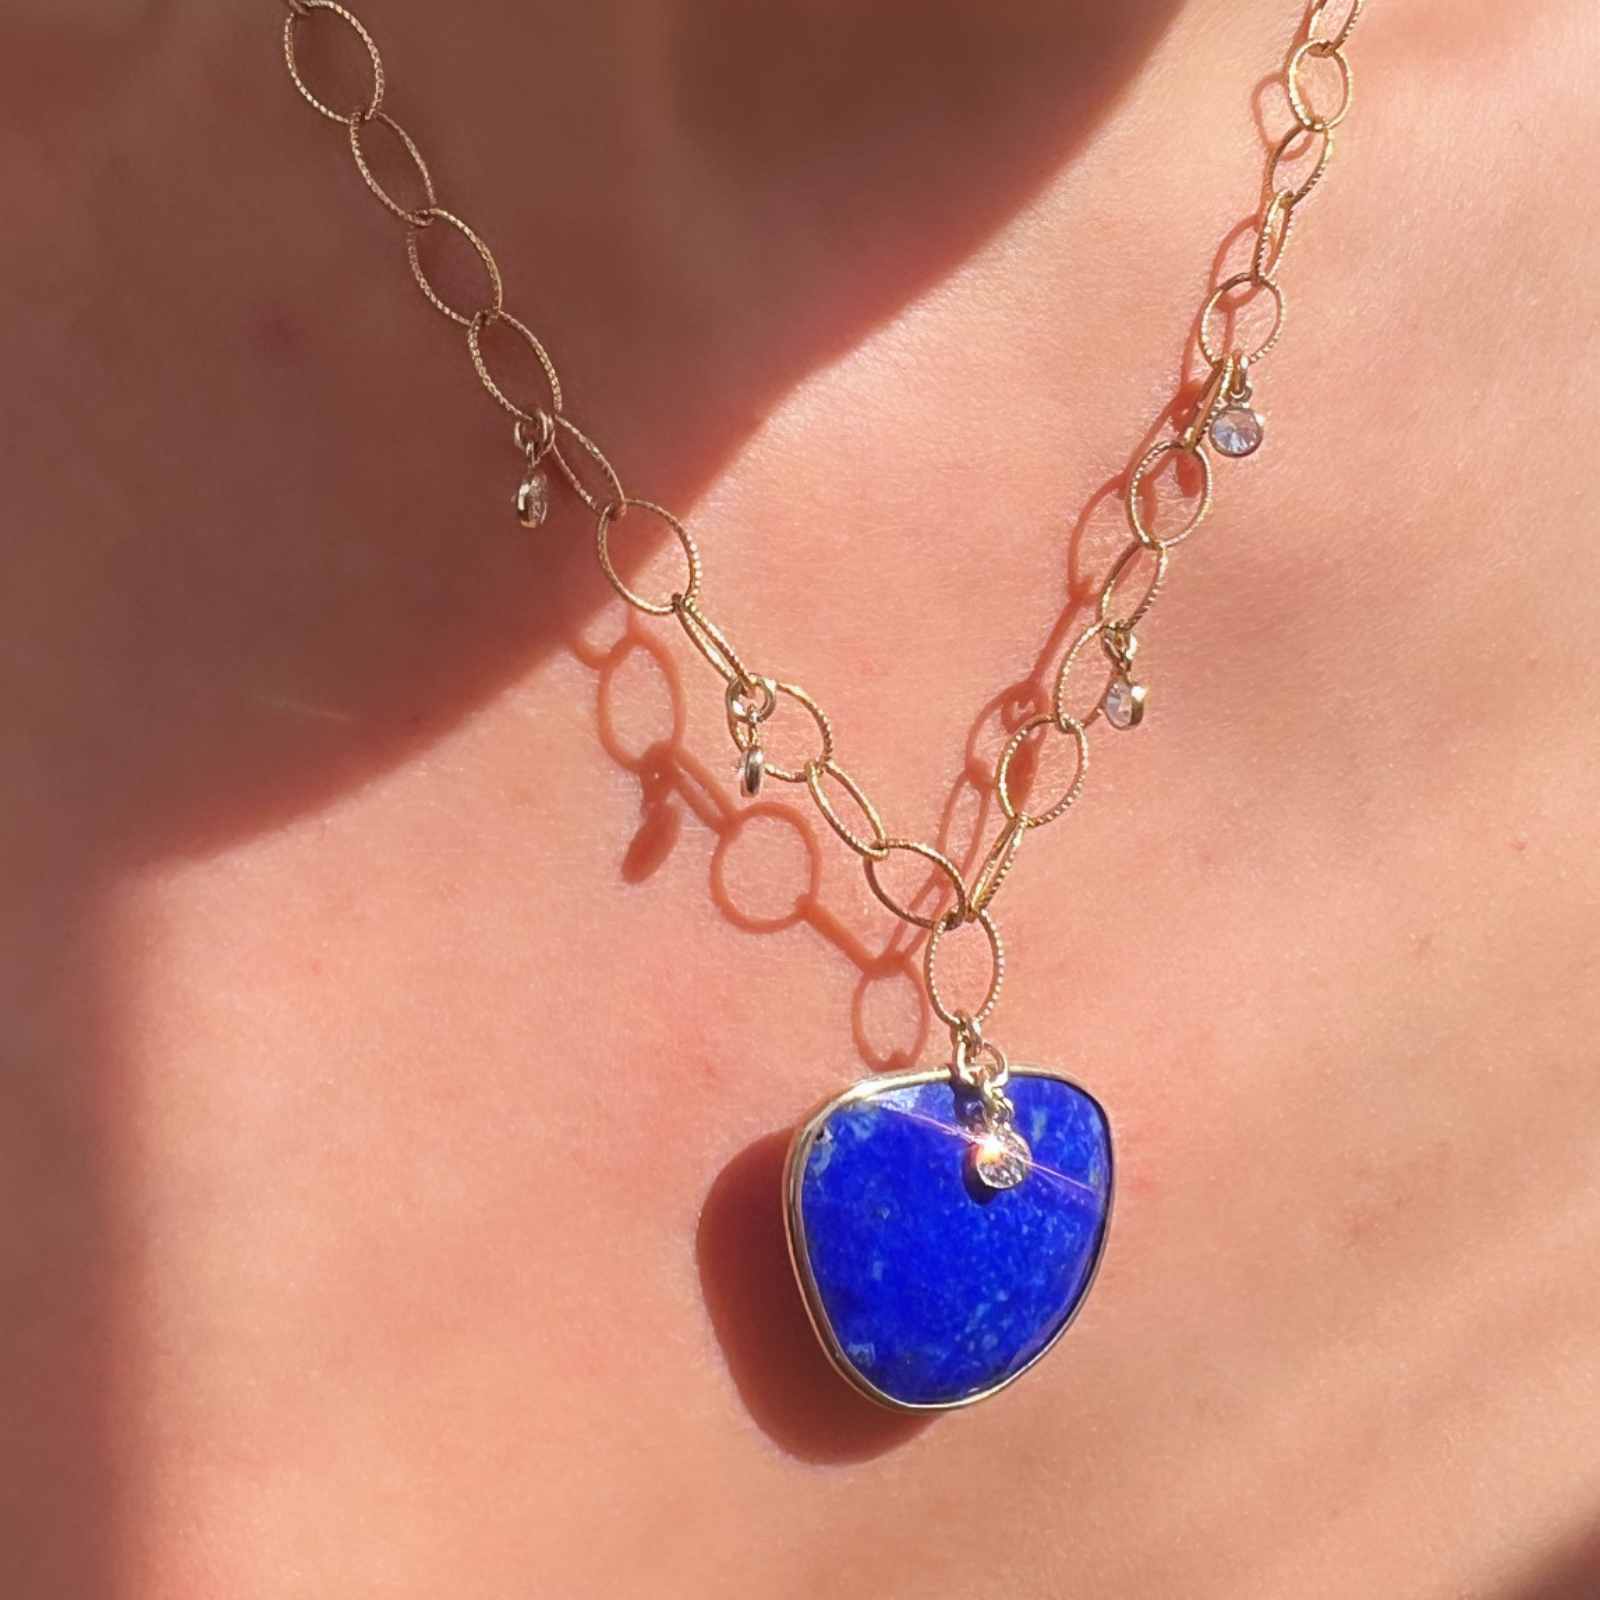 Lapis gemstone necklace on a textured oval gold filled chain with cx charms on a models neck | Camille Jewelry 